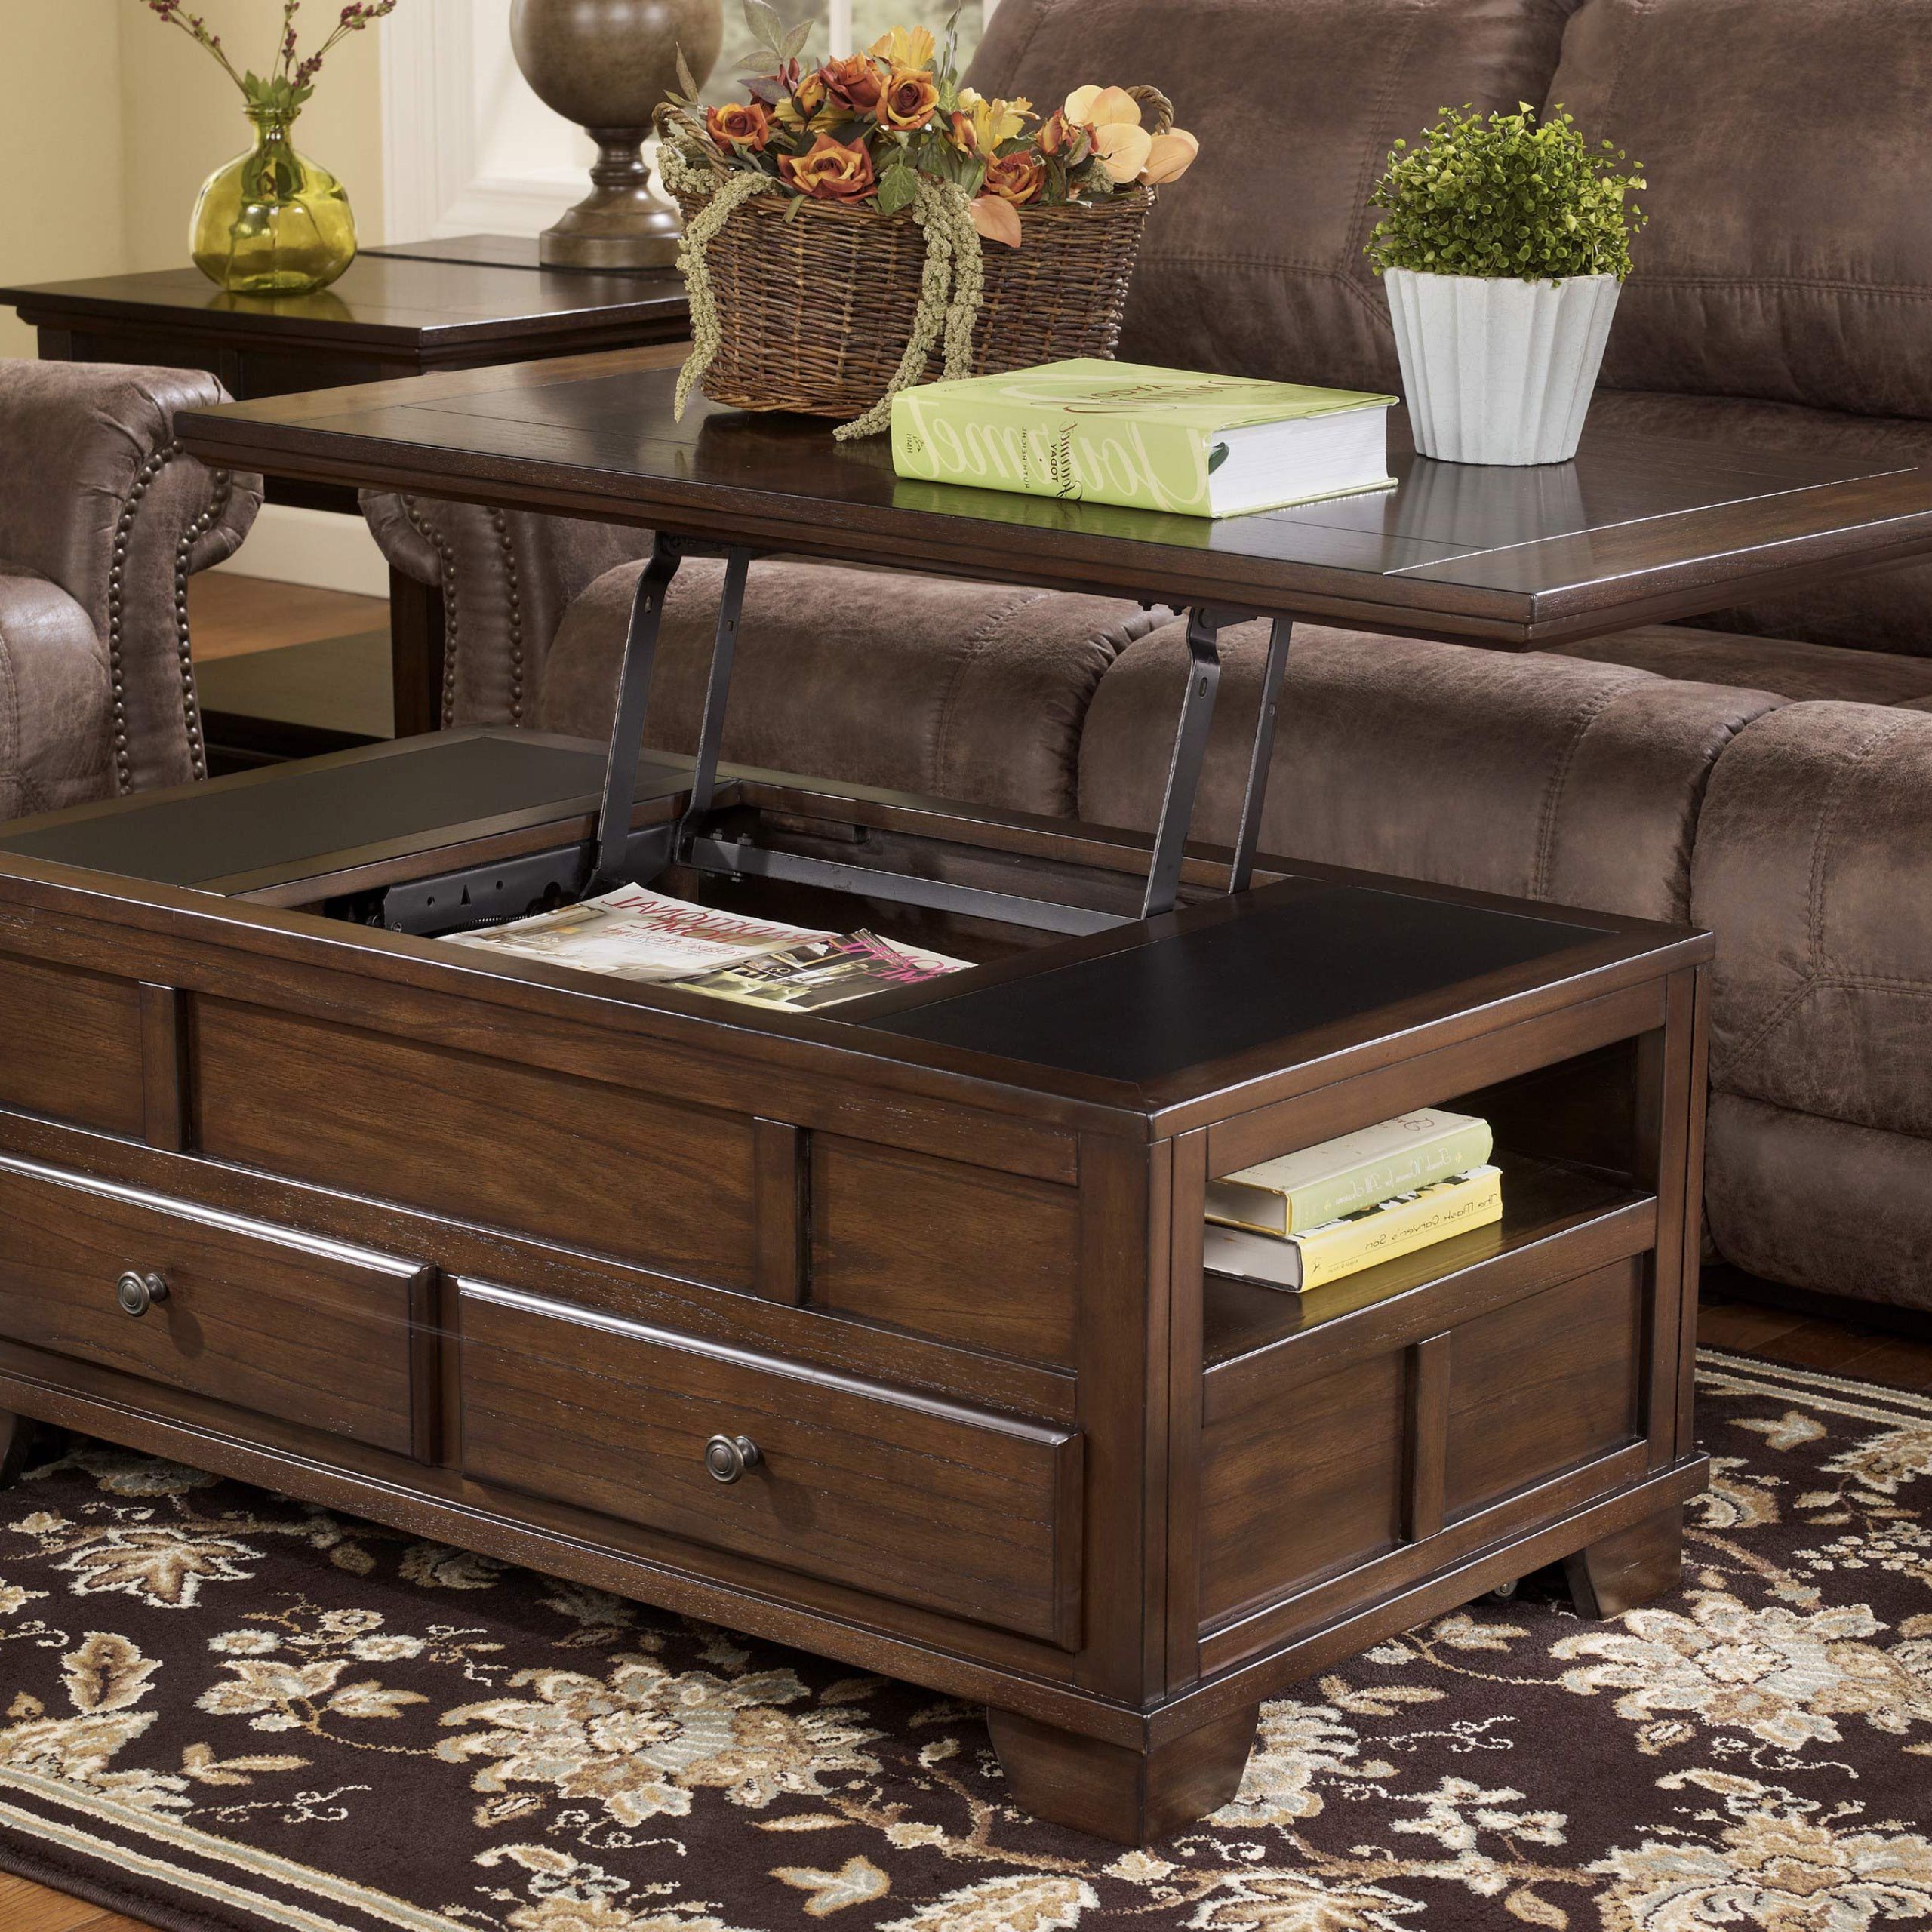 Lift Top Coffee Tables With Storage Pertaining To Lift Top Coffee Tables With Hidden Storage Compartments (Gallery 13 of 20)